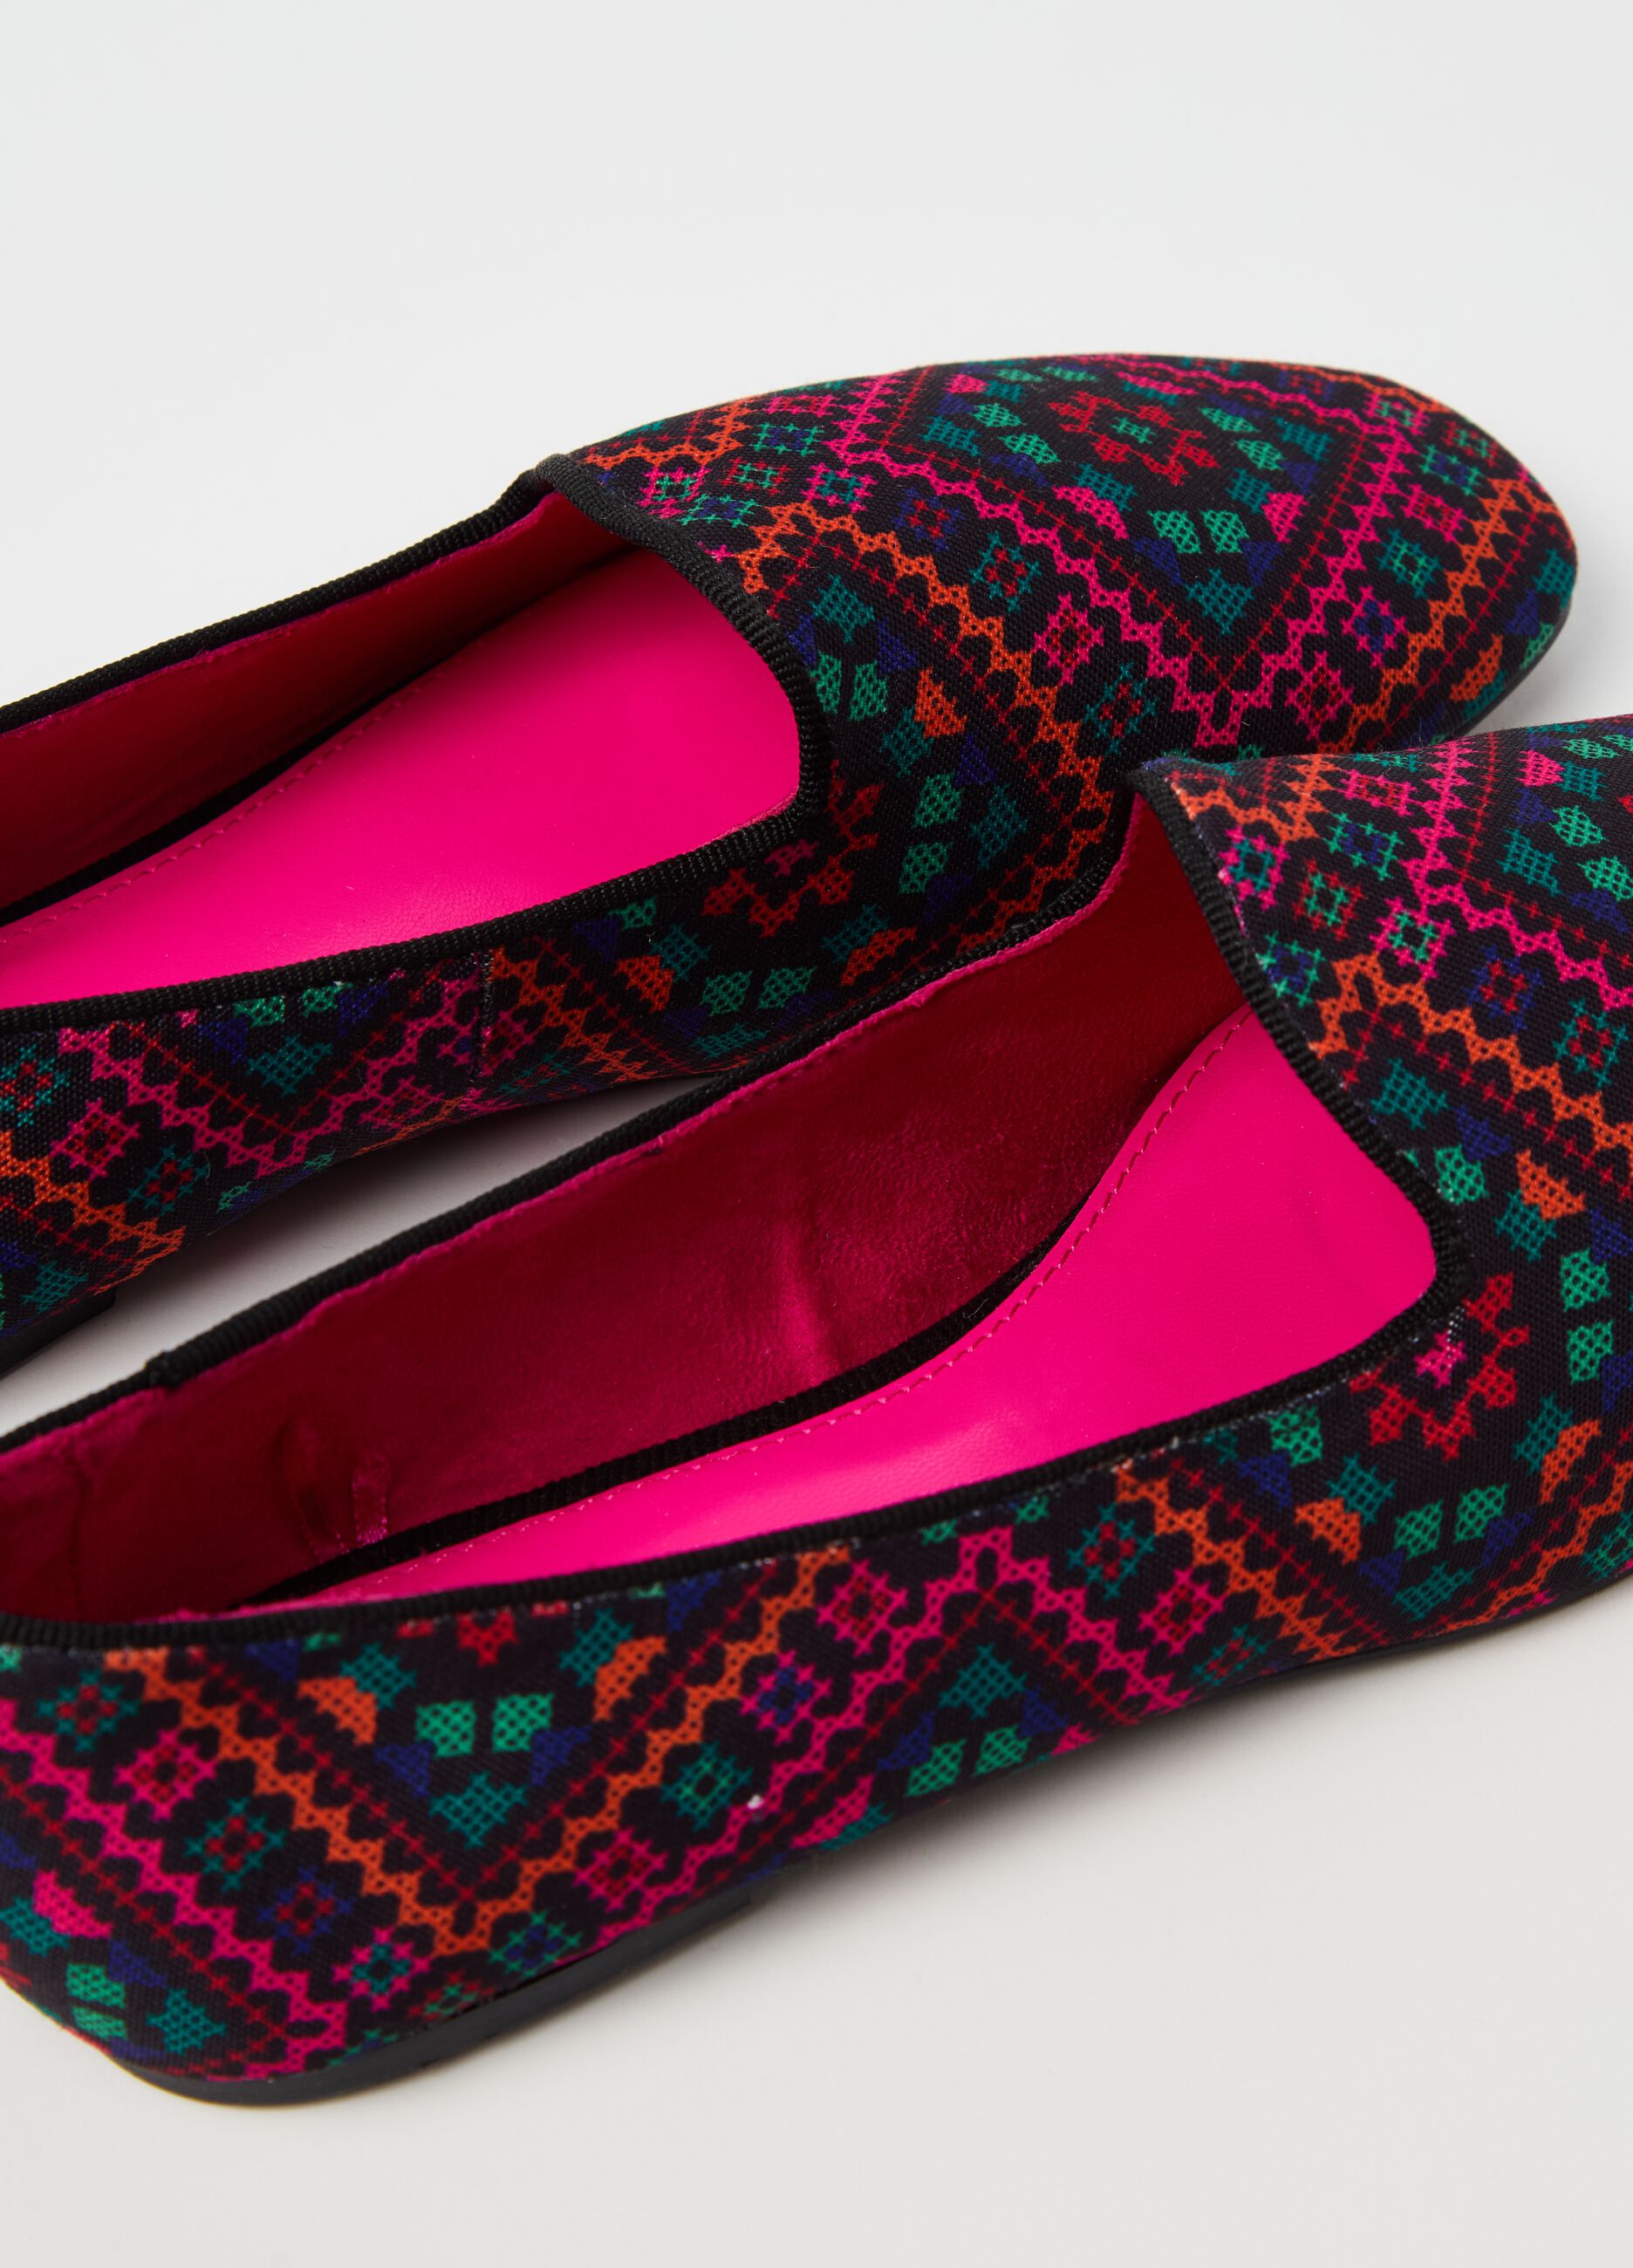 Slipper shoes with geometric pattern_2